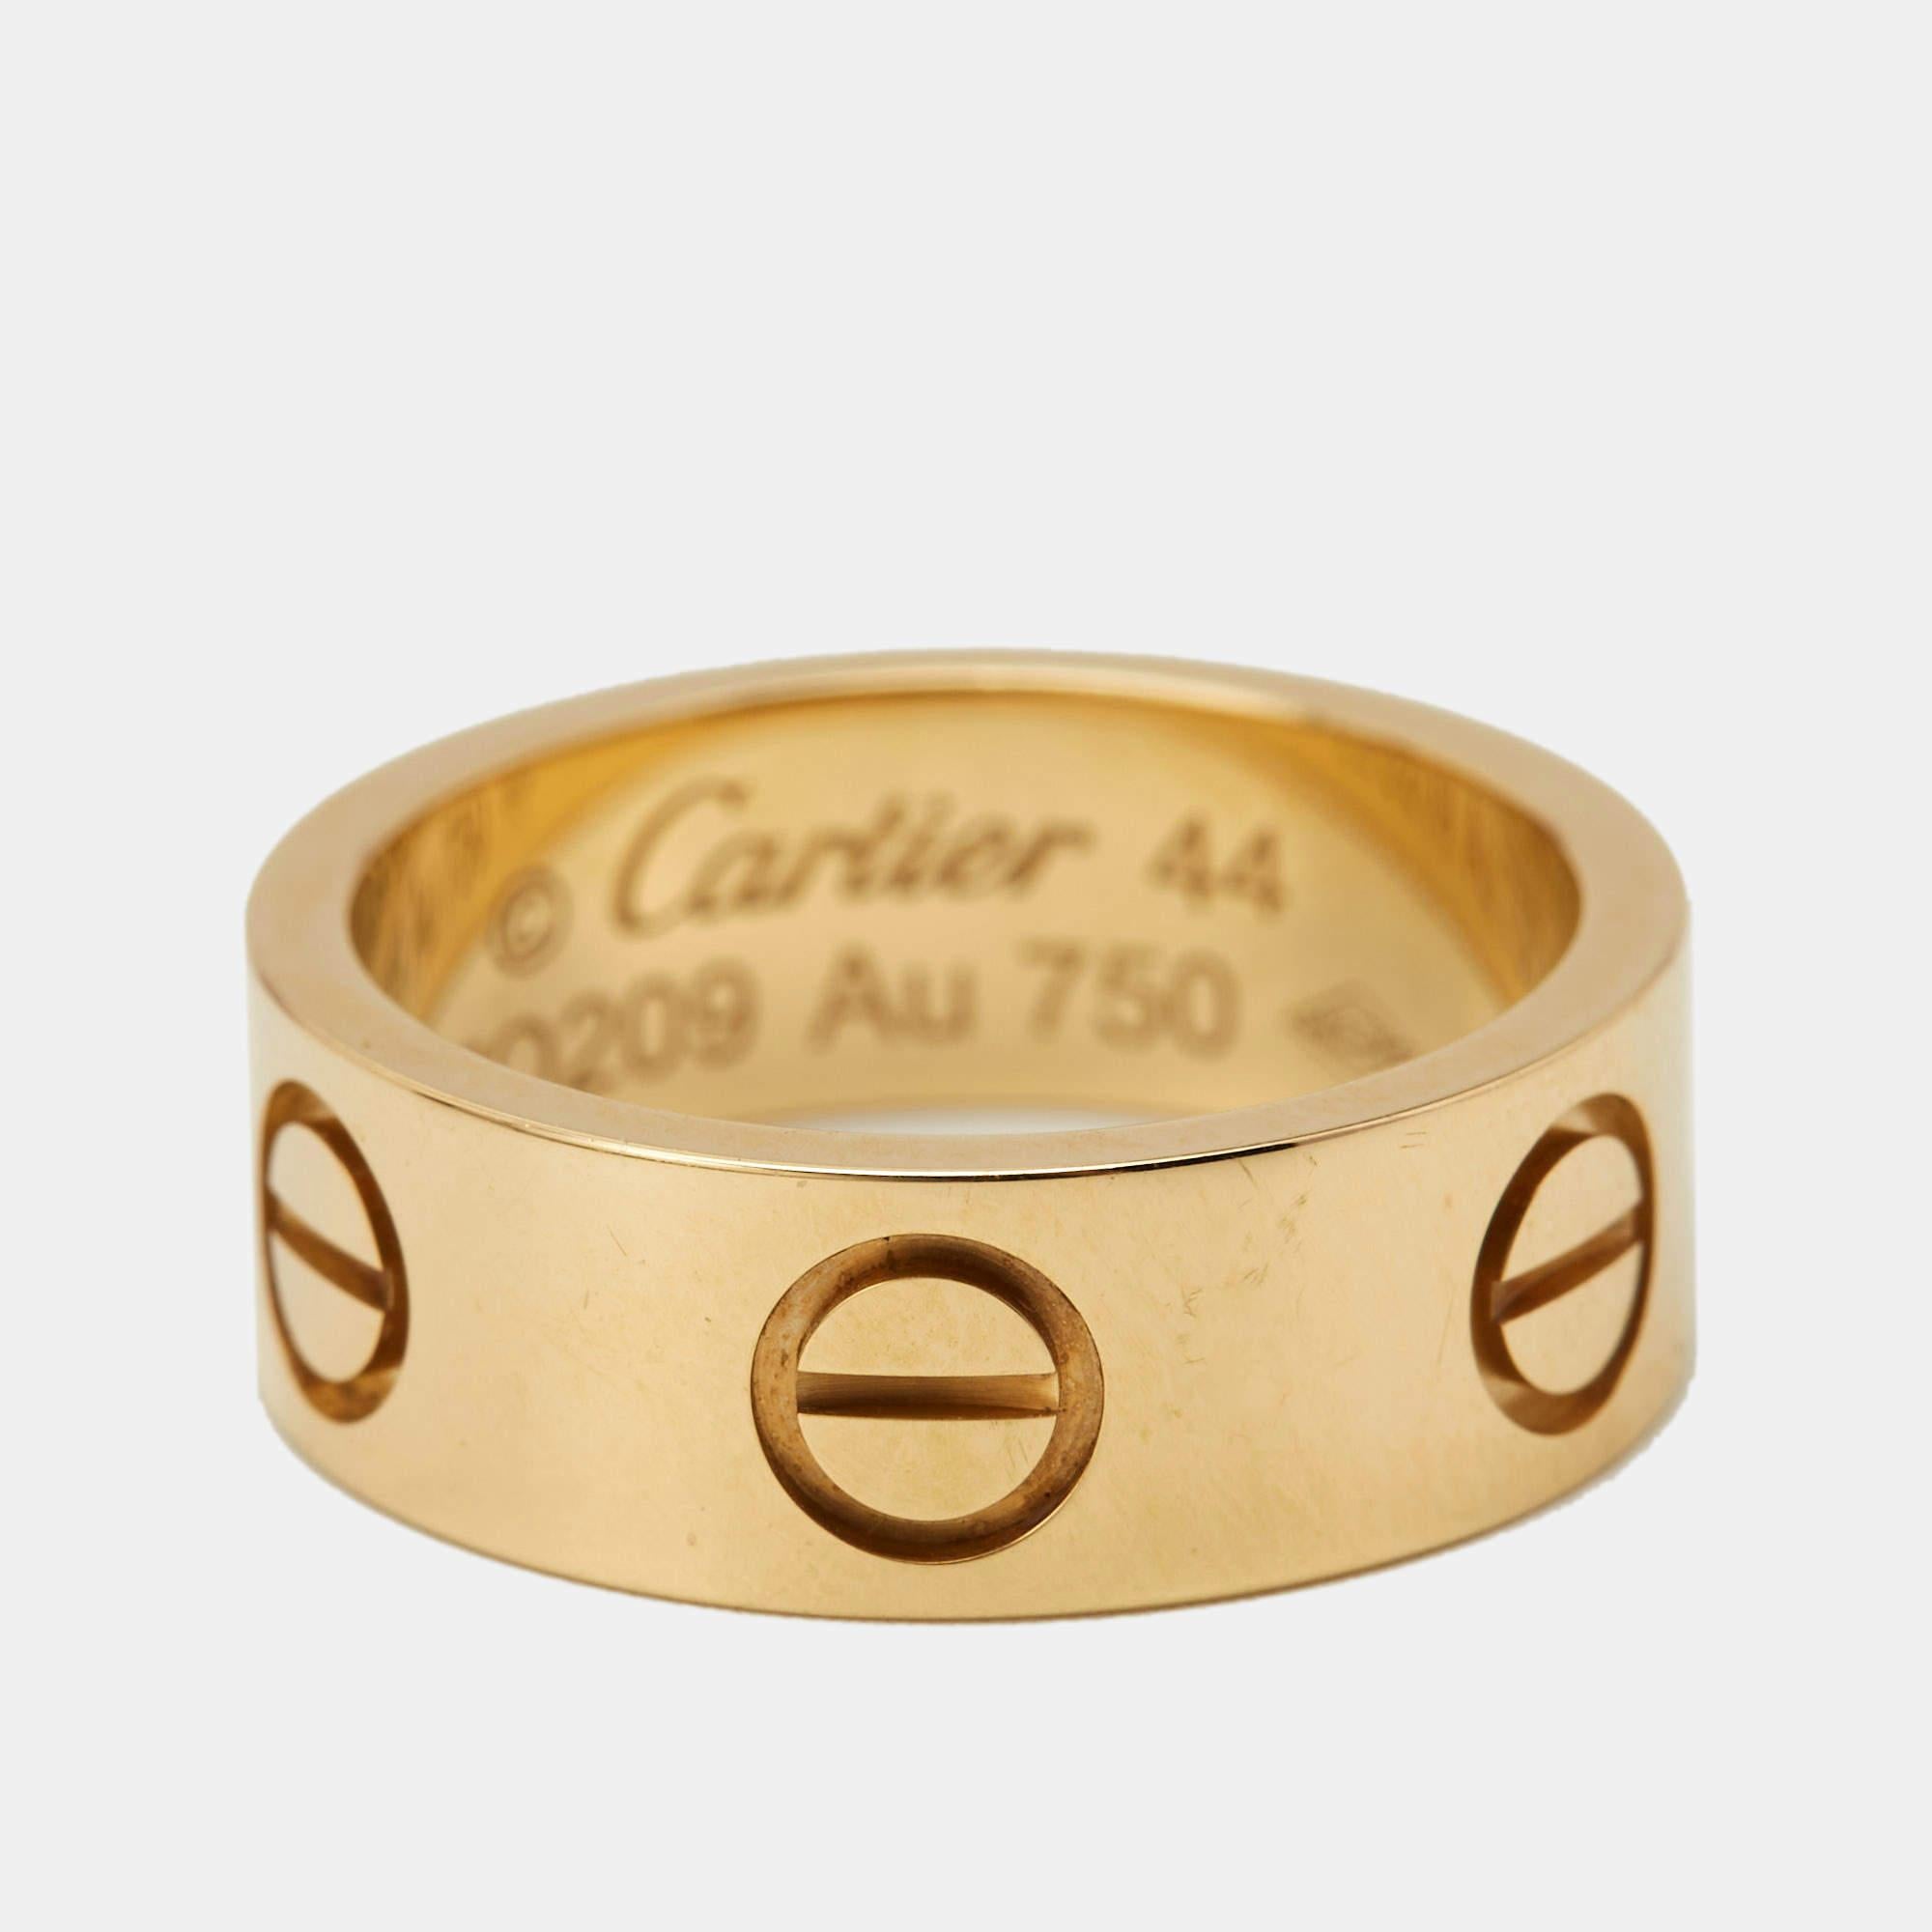 One of the most iconic and loved designs from the house of Cartier, this stunning Love ring is an icon of style and luxury. Constructed in 18k yellow gold, this ring features screw details all around the surface as symbols of a sealed and secured